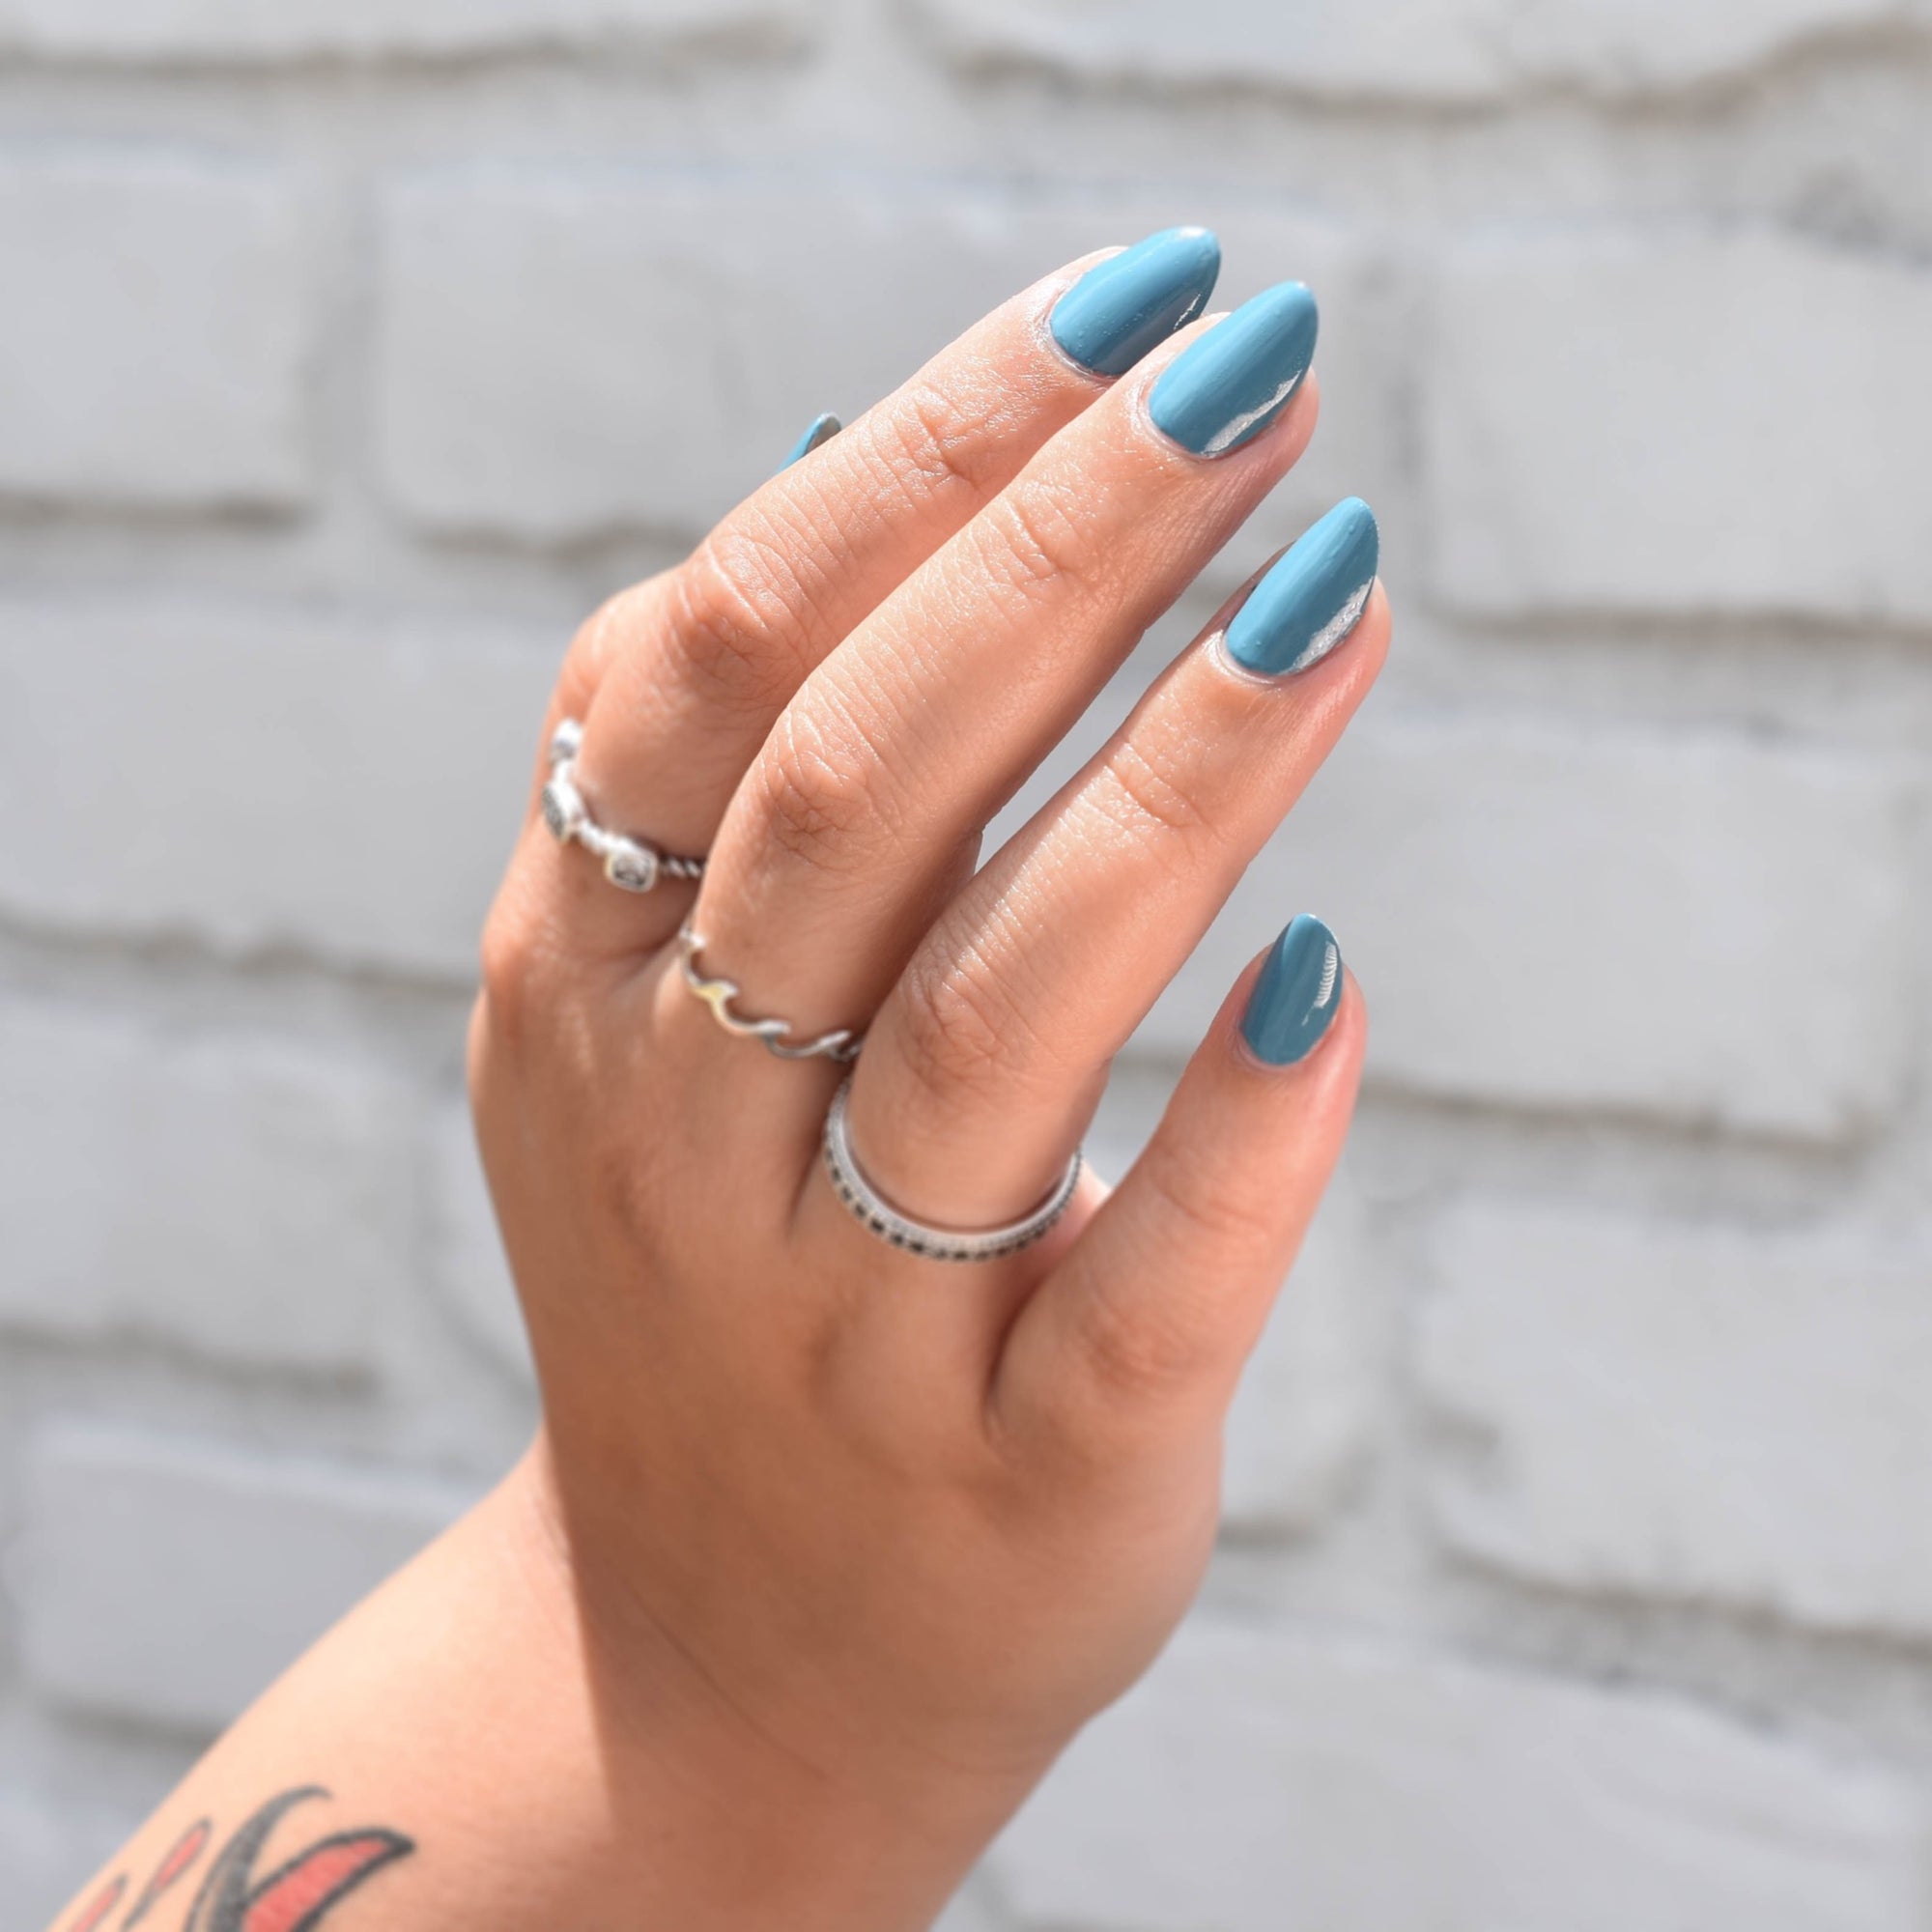 A Model's hand with medium skin tone in daylight wearing Eggsistential Nail Polish from Hello Birdie which is a muted blueish teal. Model is wearing three silver rings and a glimpse of her tattoo on her arm is shown. The background is a painted white brick.